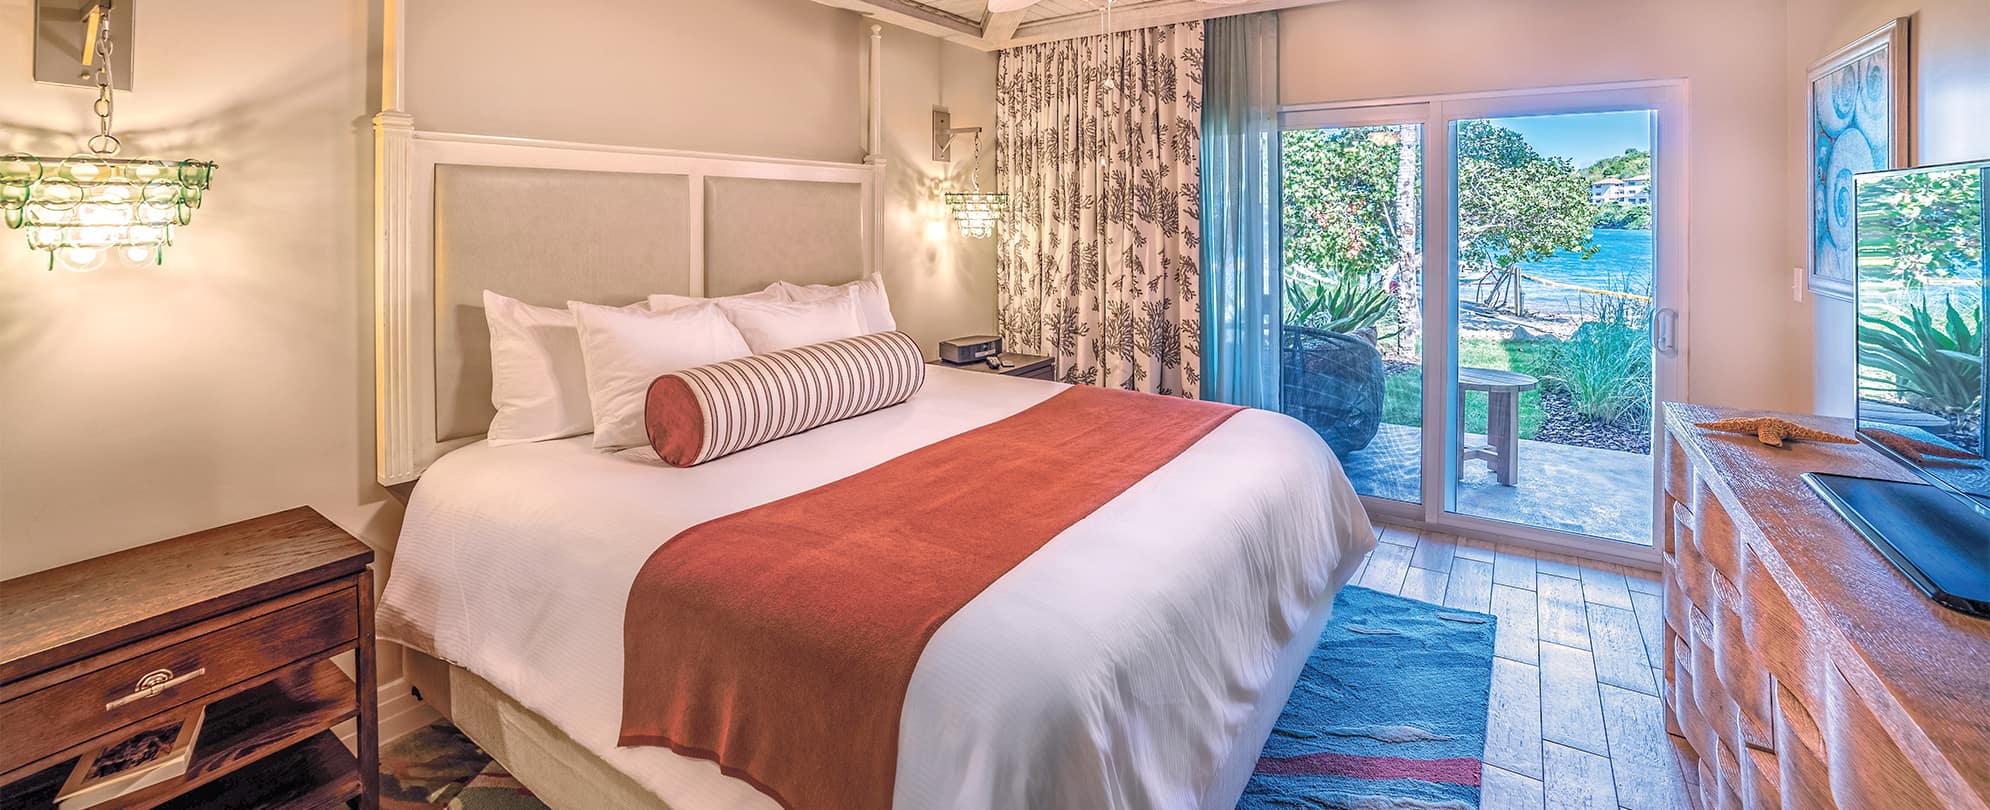 Bed with white linens and red blanket in Presidential Reserve suite at Margaritaville Vacation Club by Wyndham - St. Thomas.